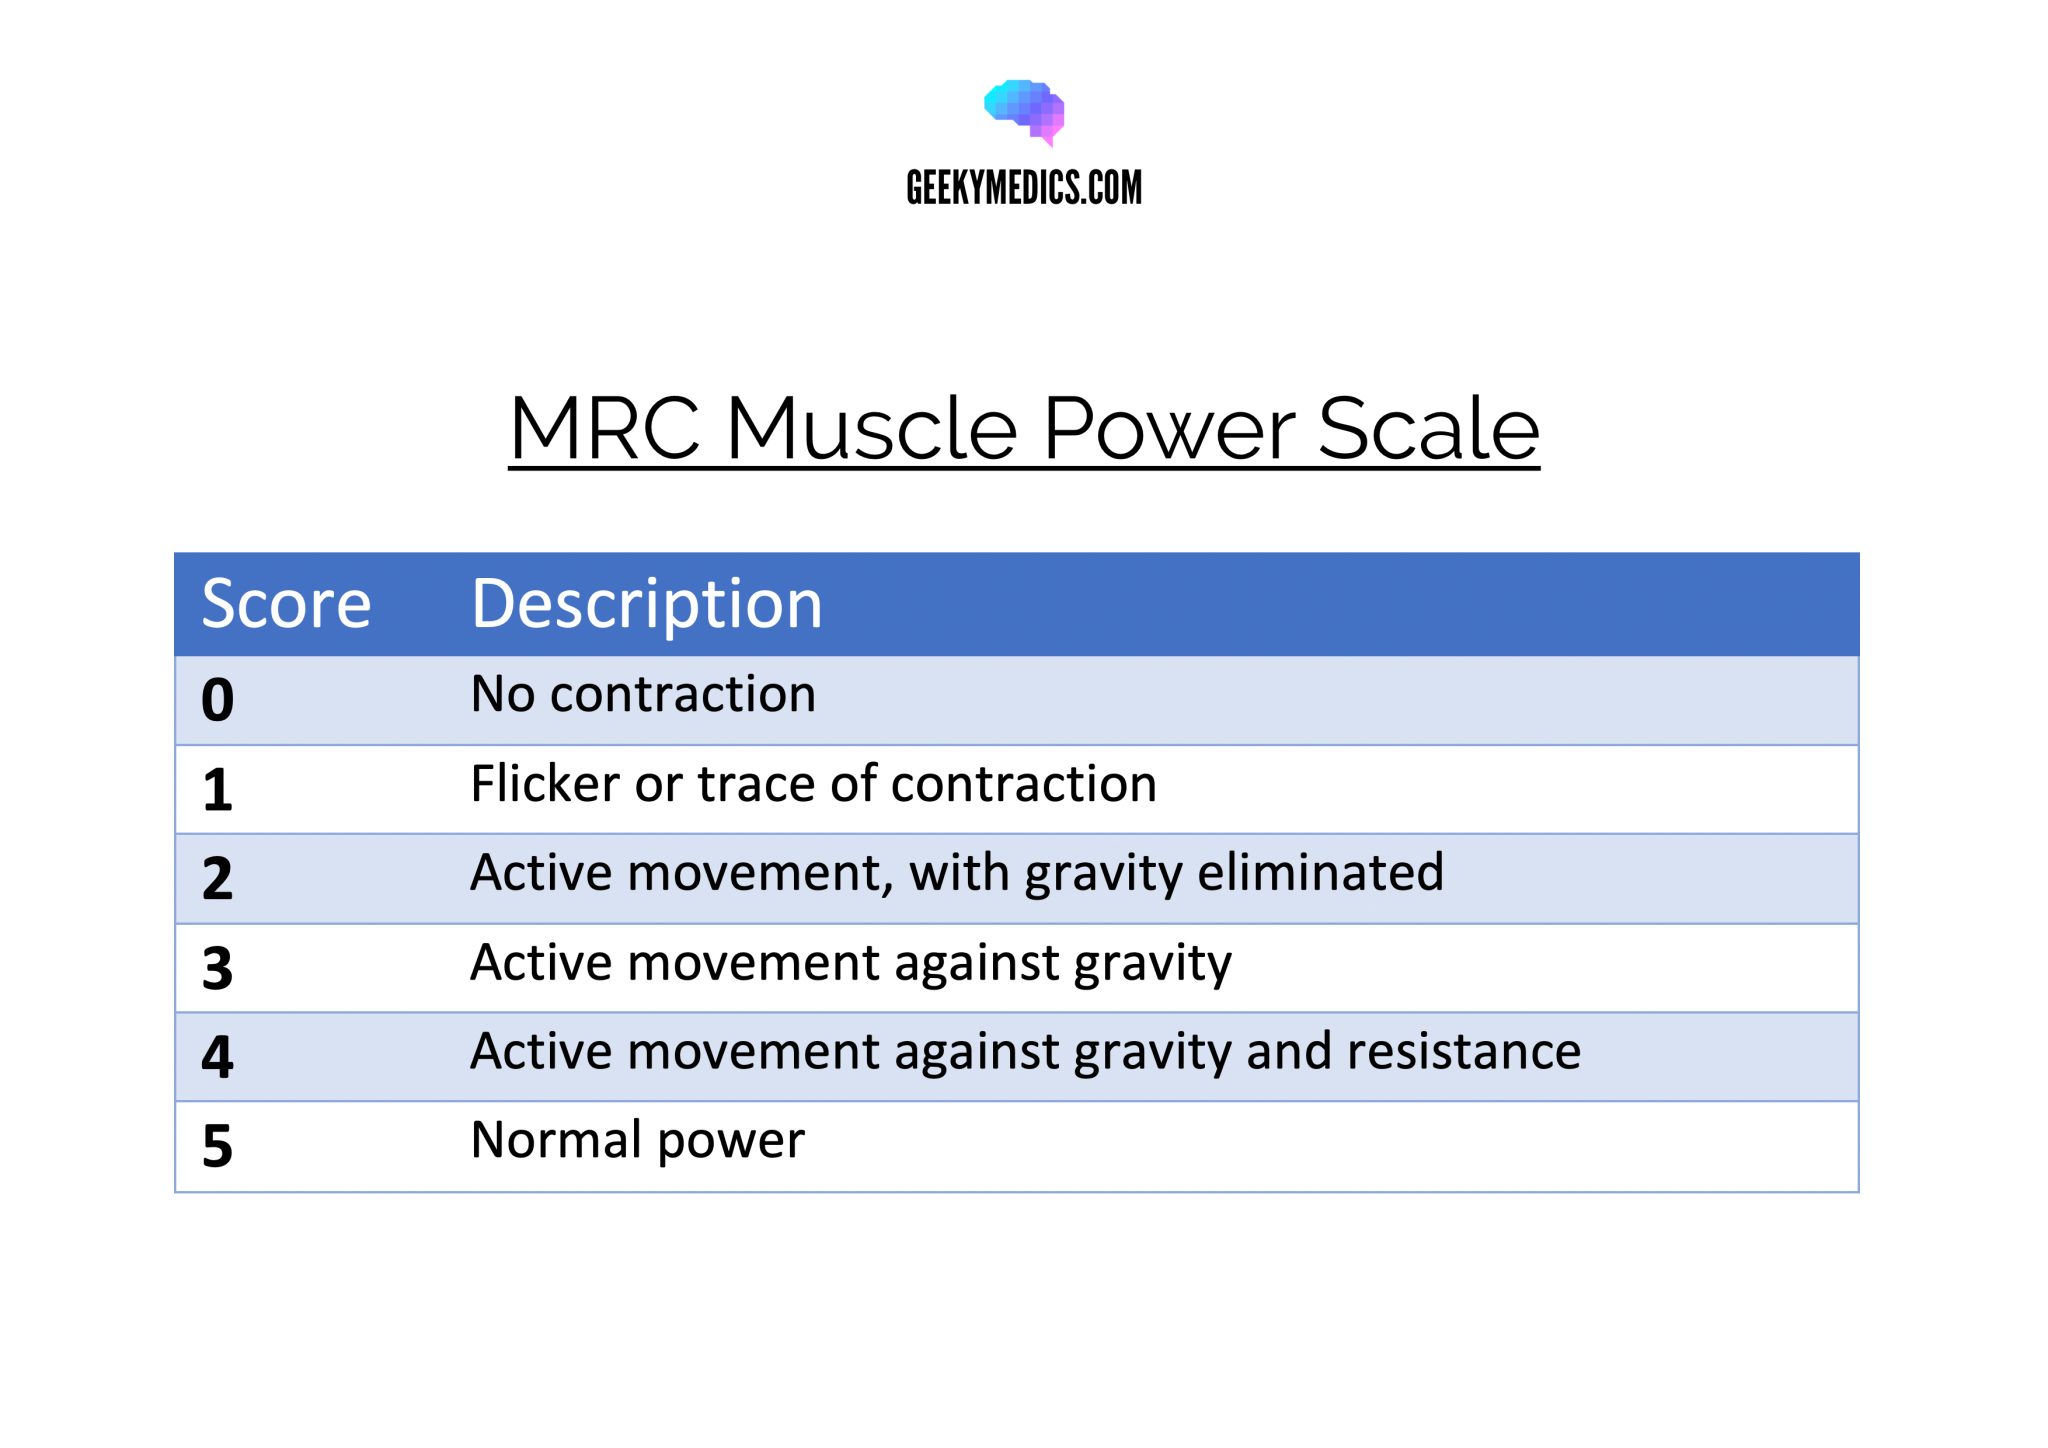 medical research council grading of muscle strength